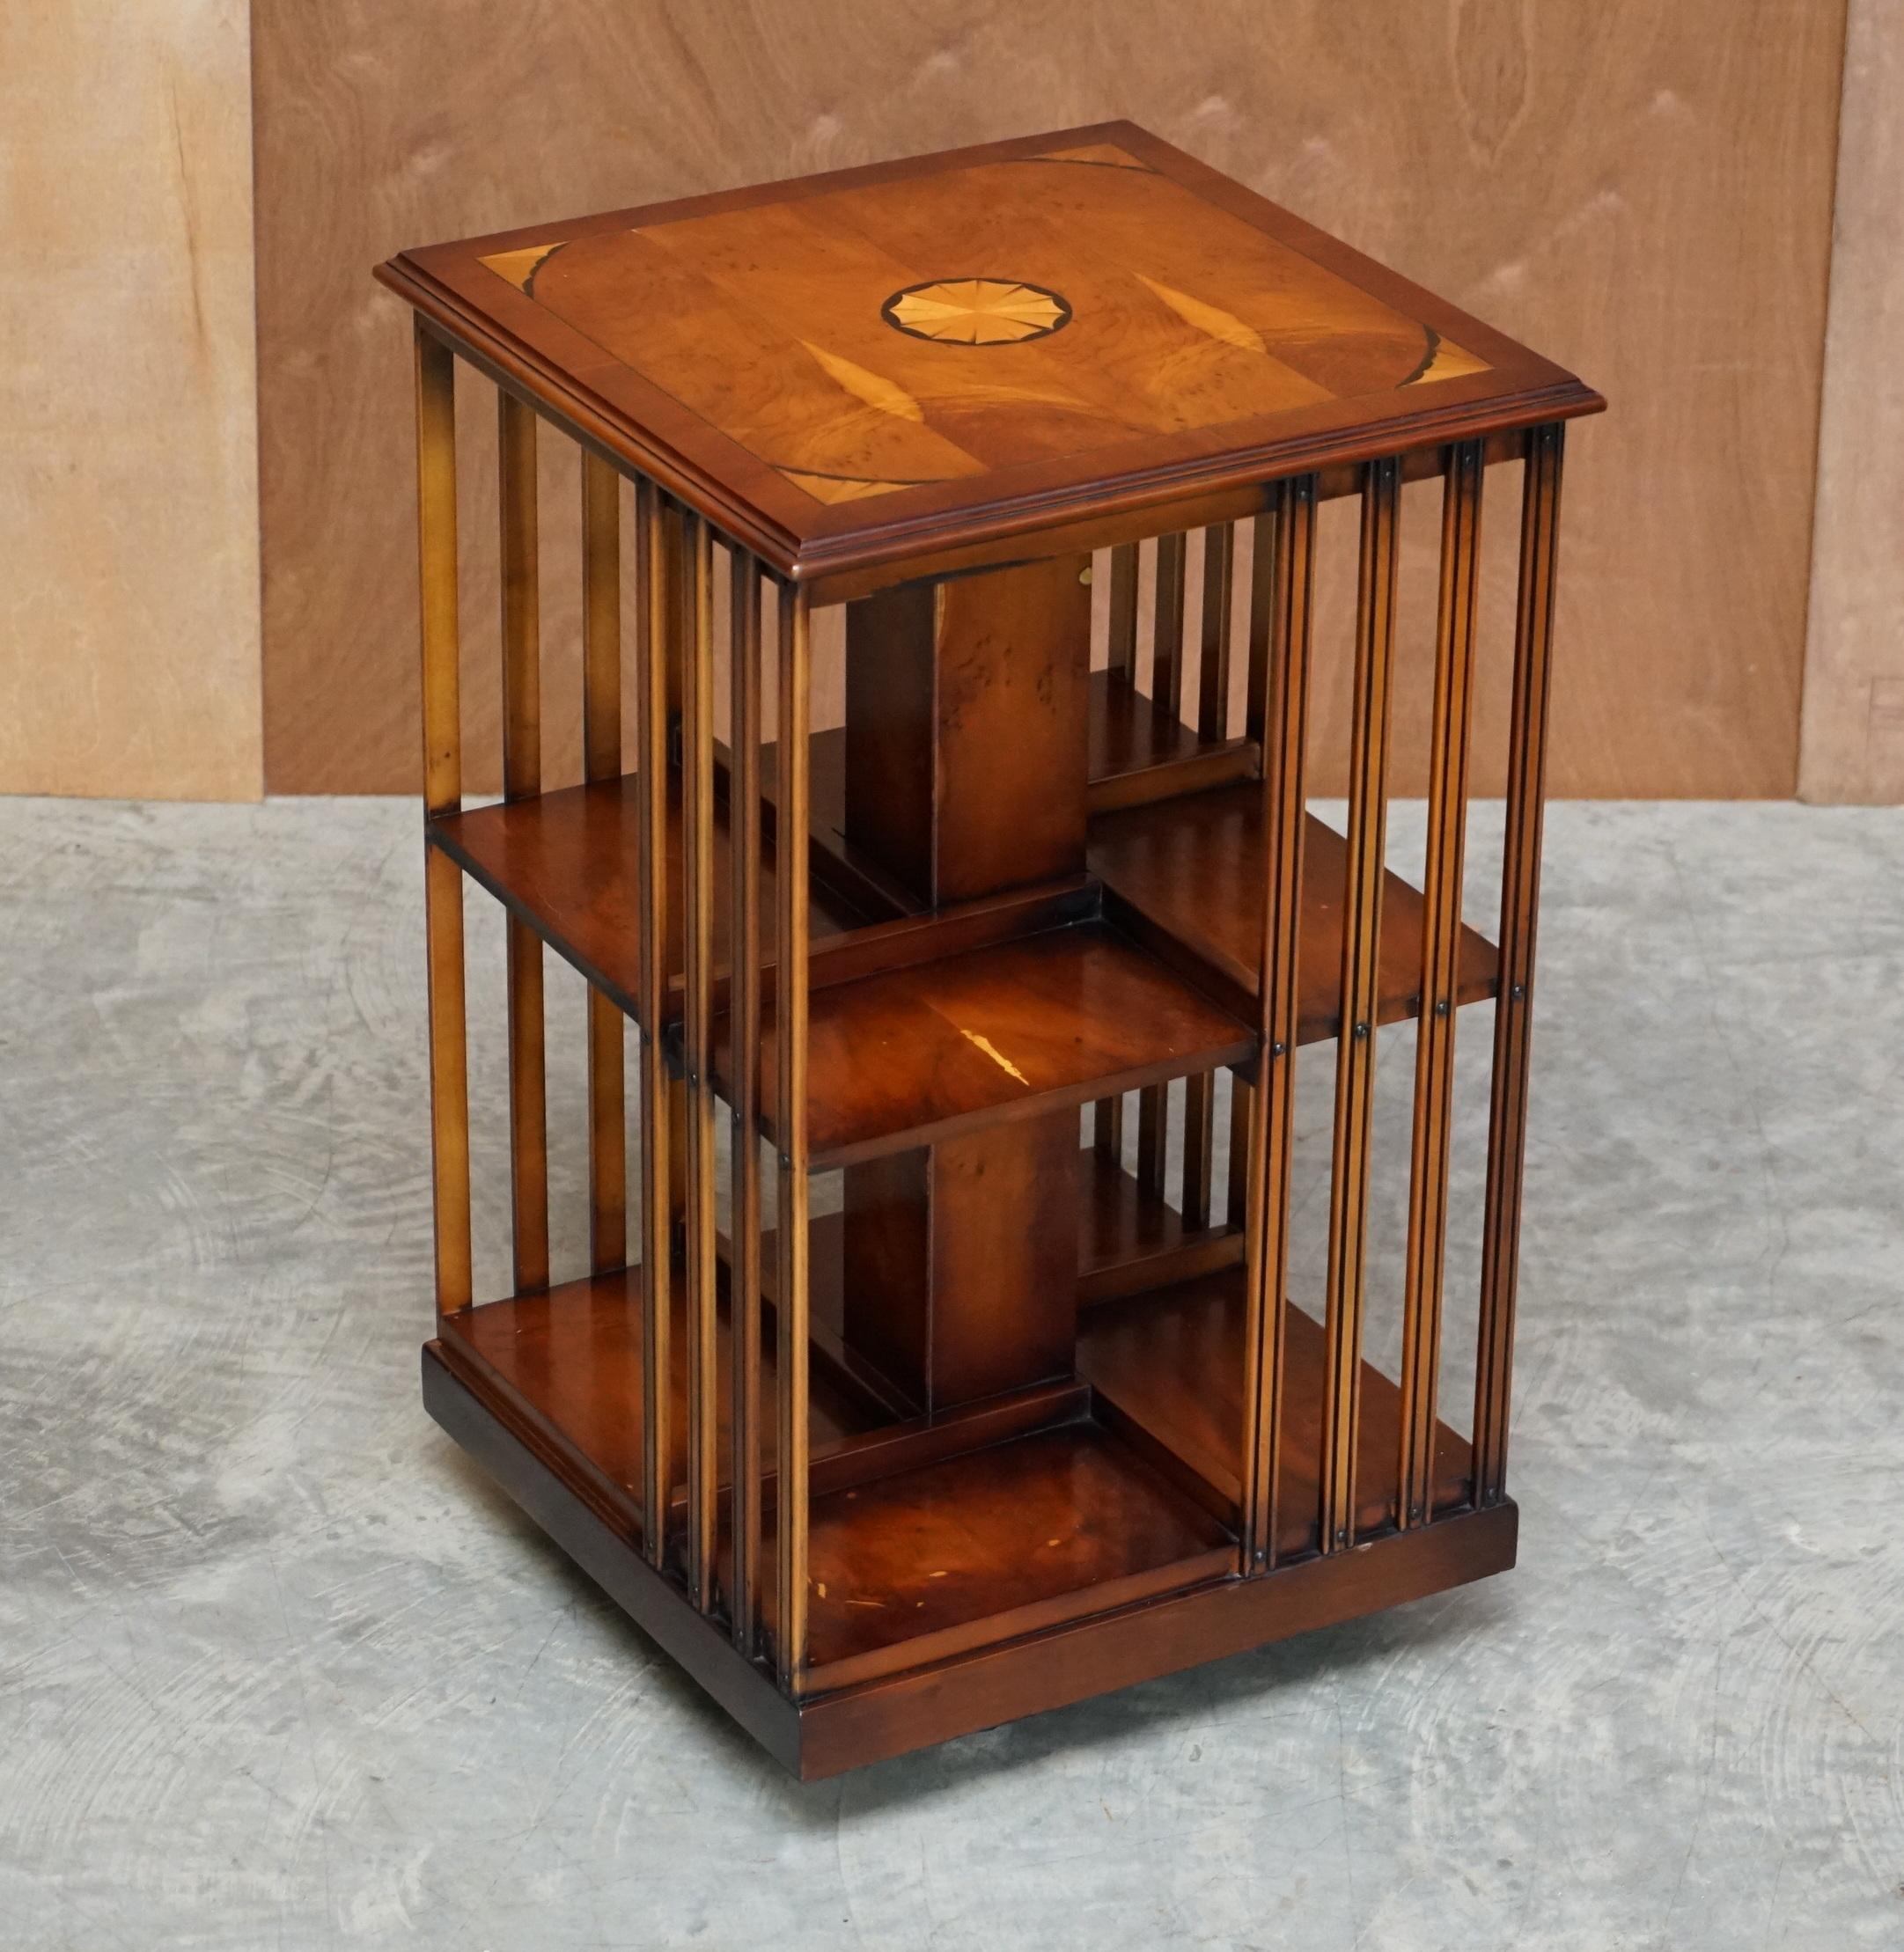 We are delighted to offer for sale this stunning vintage Sheraton Revival burr Yew & Satinwood revolving bookcase table

A very good looking well made and decorative piece. Made in the Sheraton revival style with wonderful inlay and extremely